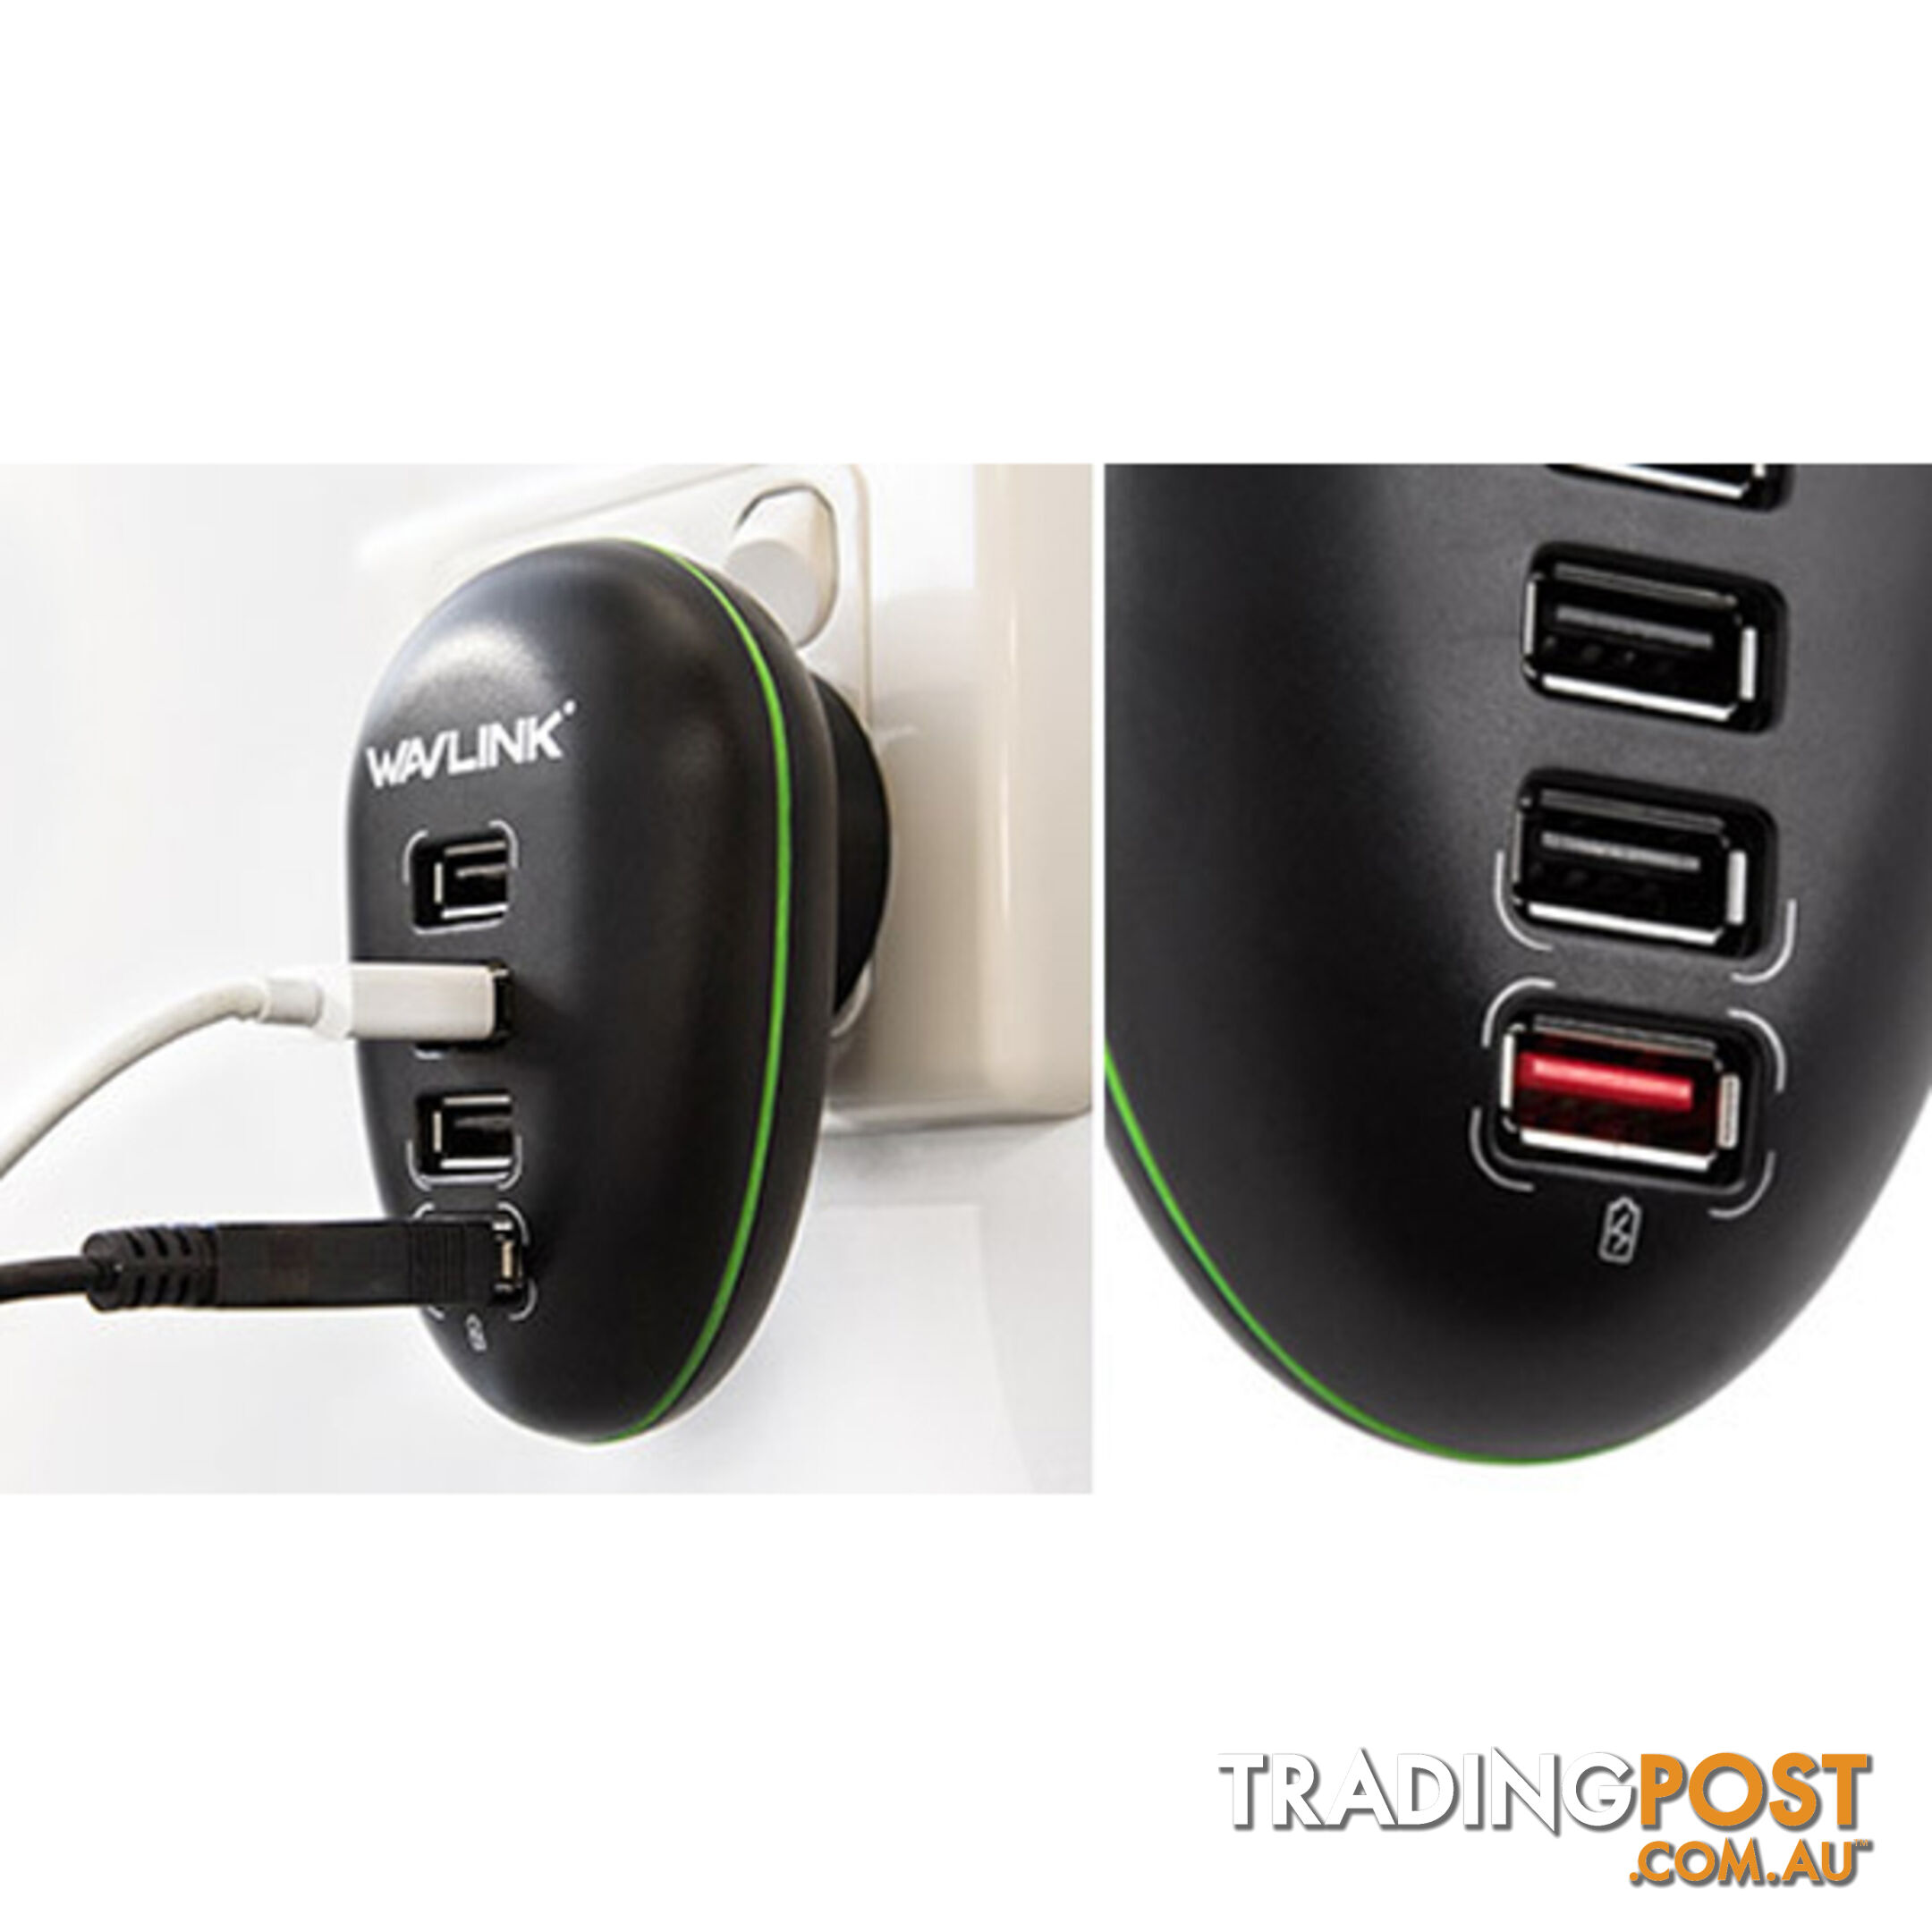 Portable 4 Port USB Charge Station including a 2.4A Fast-charging Port